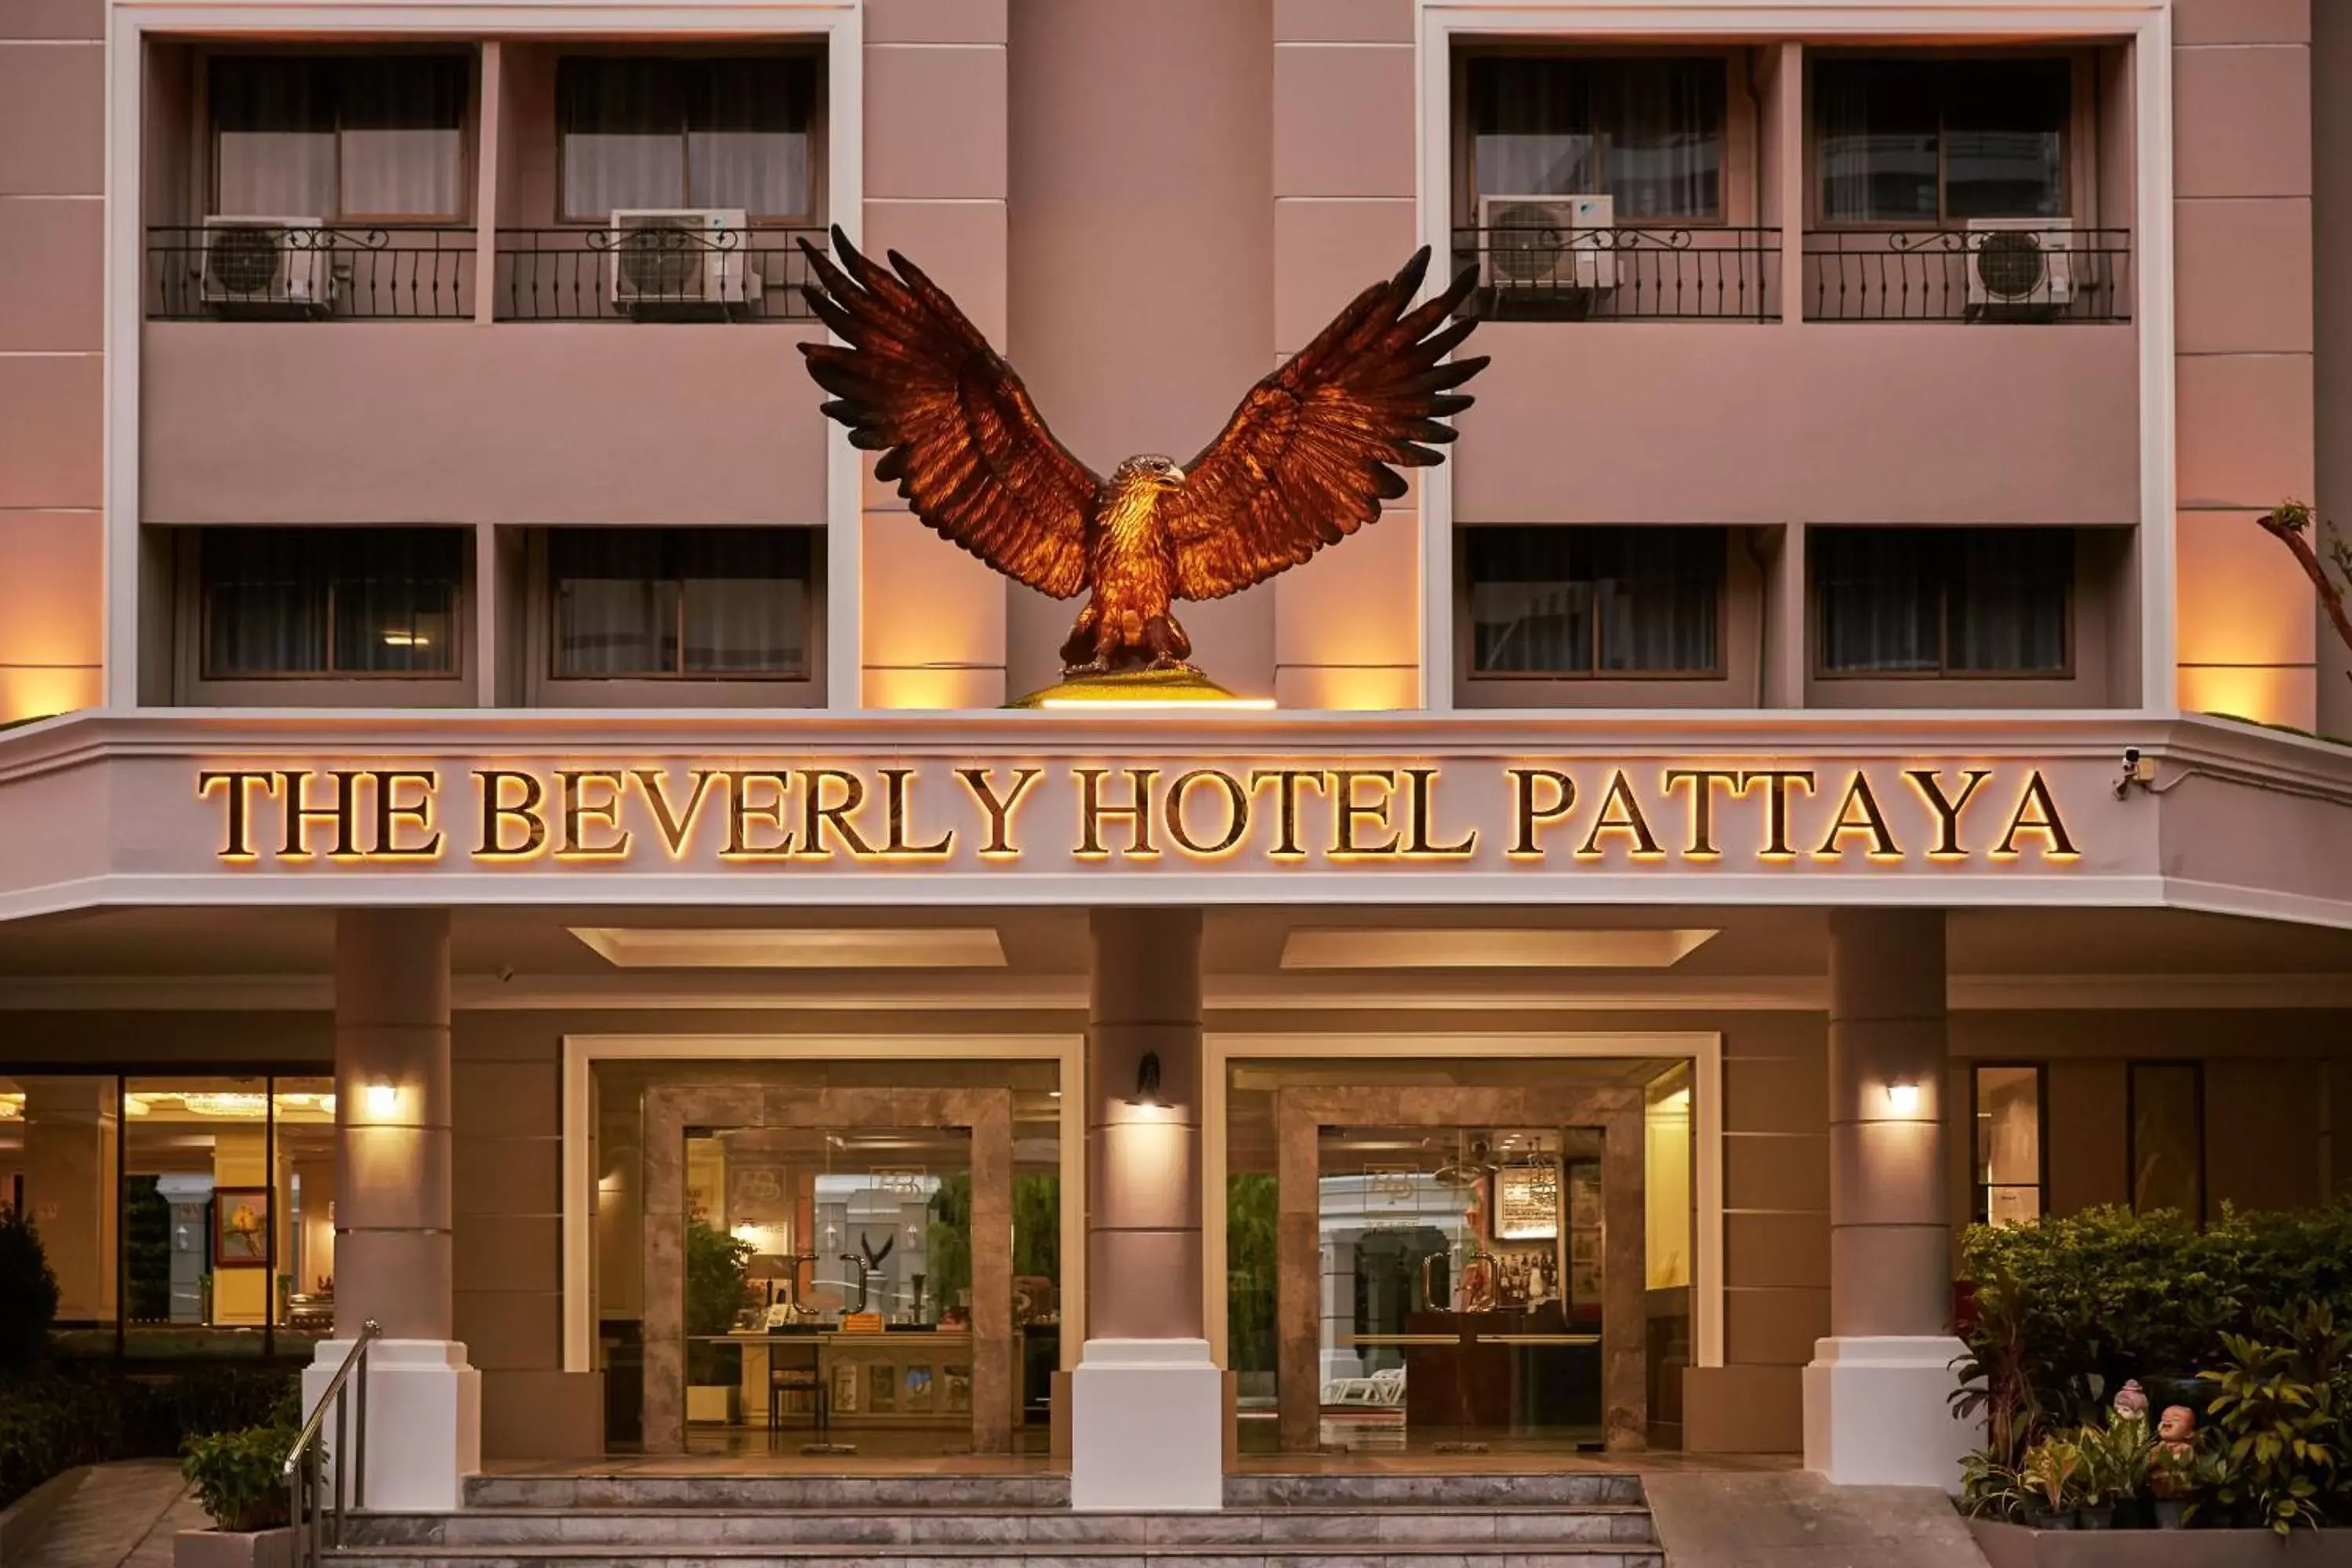 Facade/entrance in The Beverly Hotel Pattaya